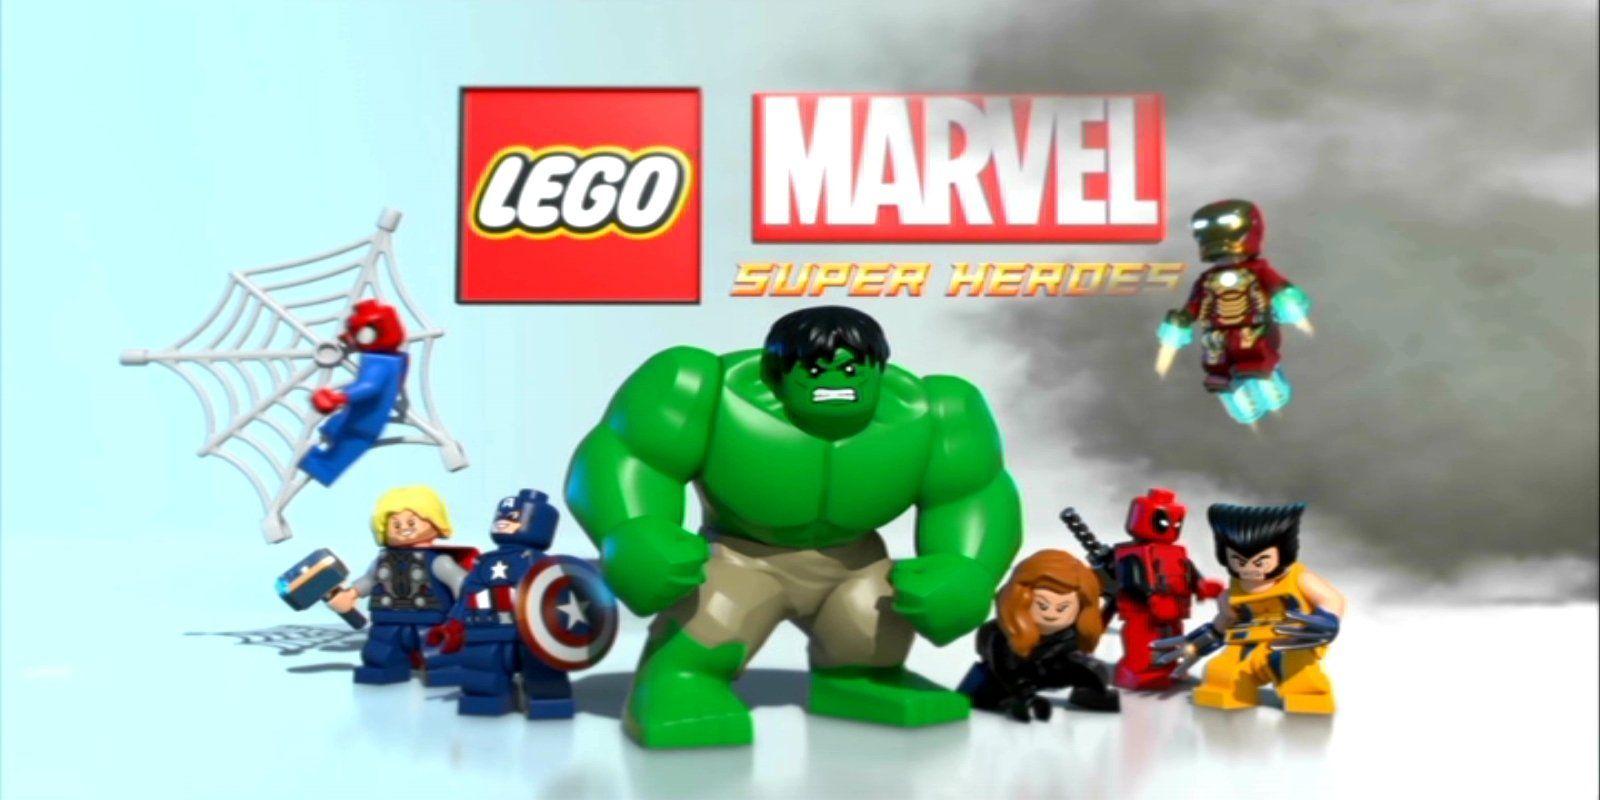 LEGO Marvel Super Heroes Wallpaper and Background Imagex800